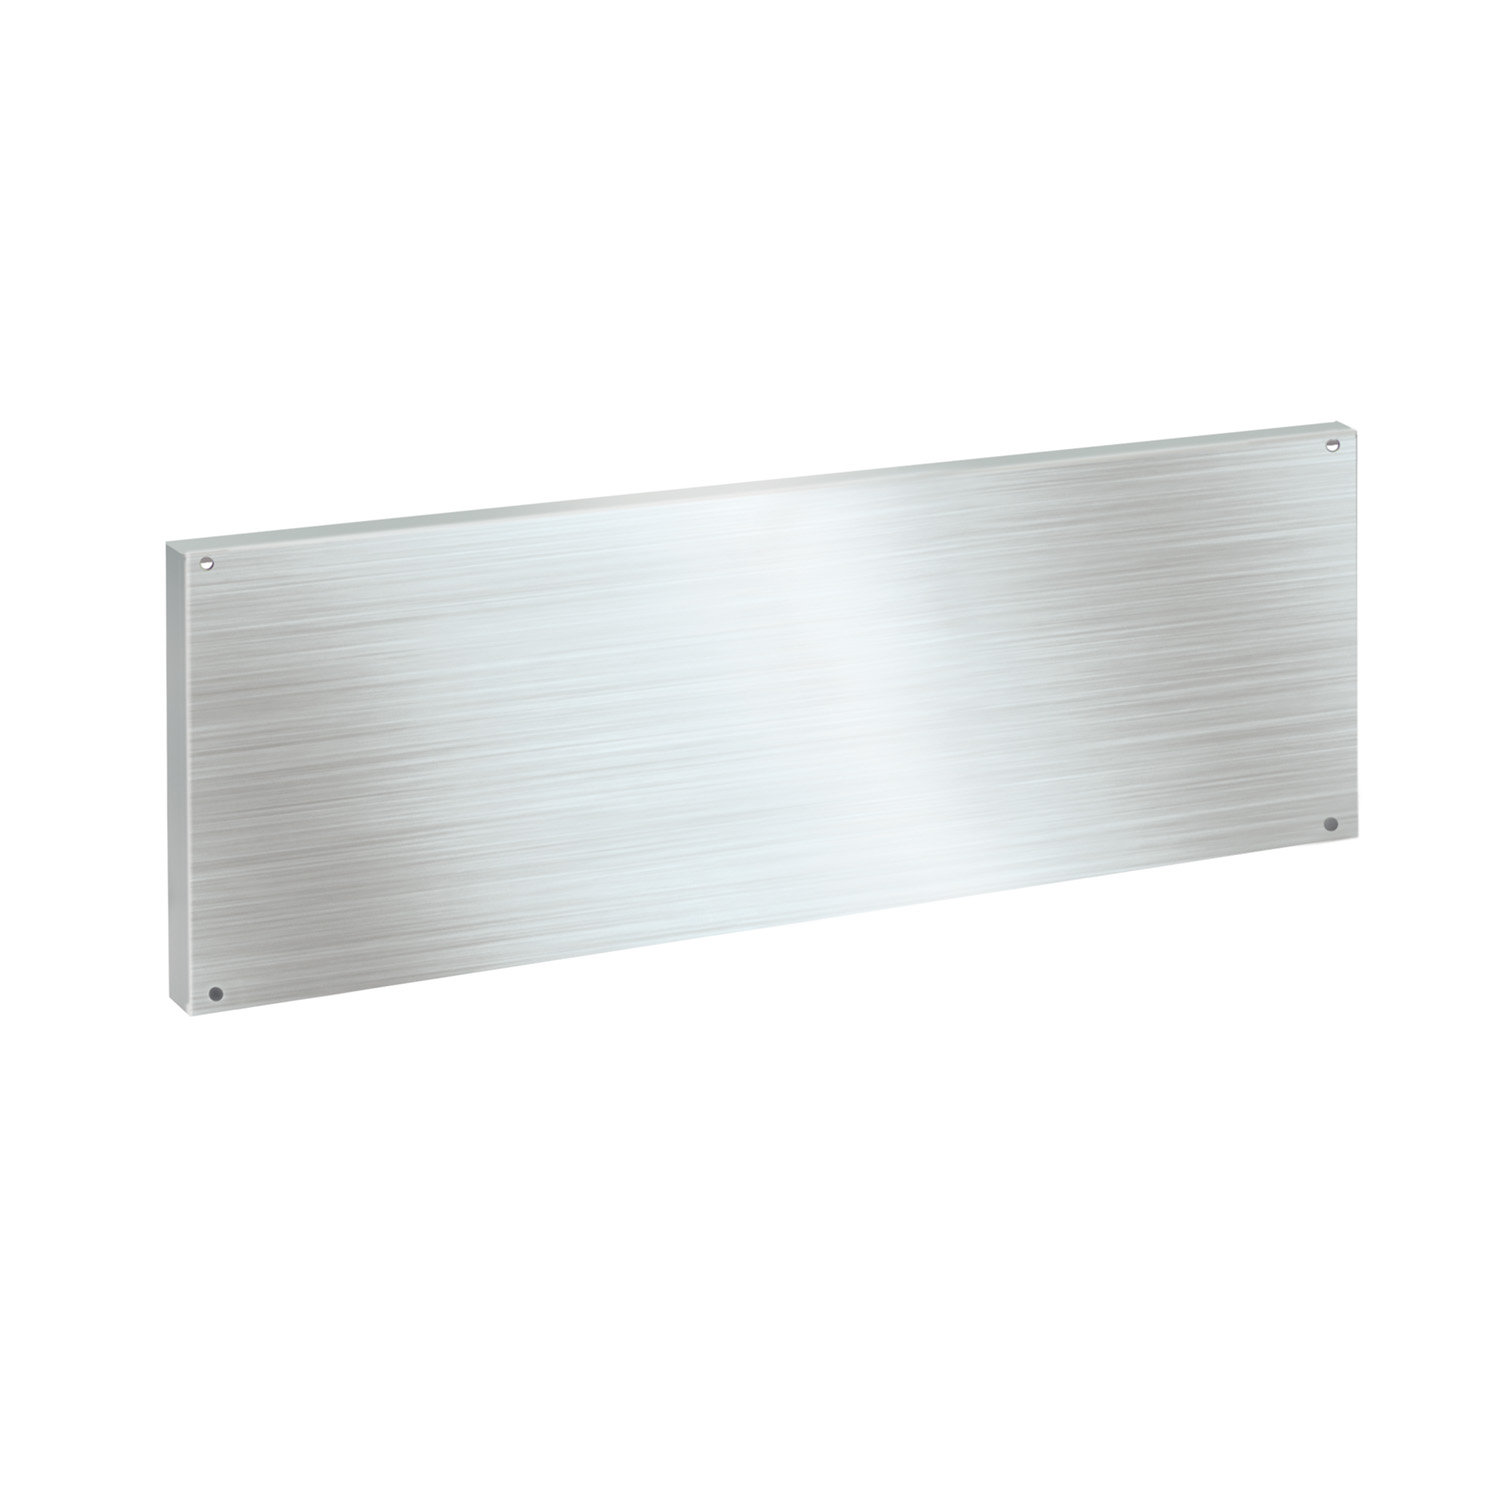 Stainless steel back panel (300 x 900mm)